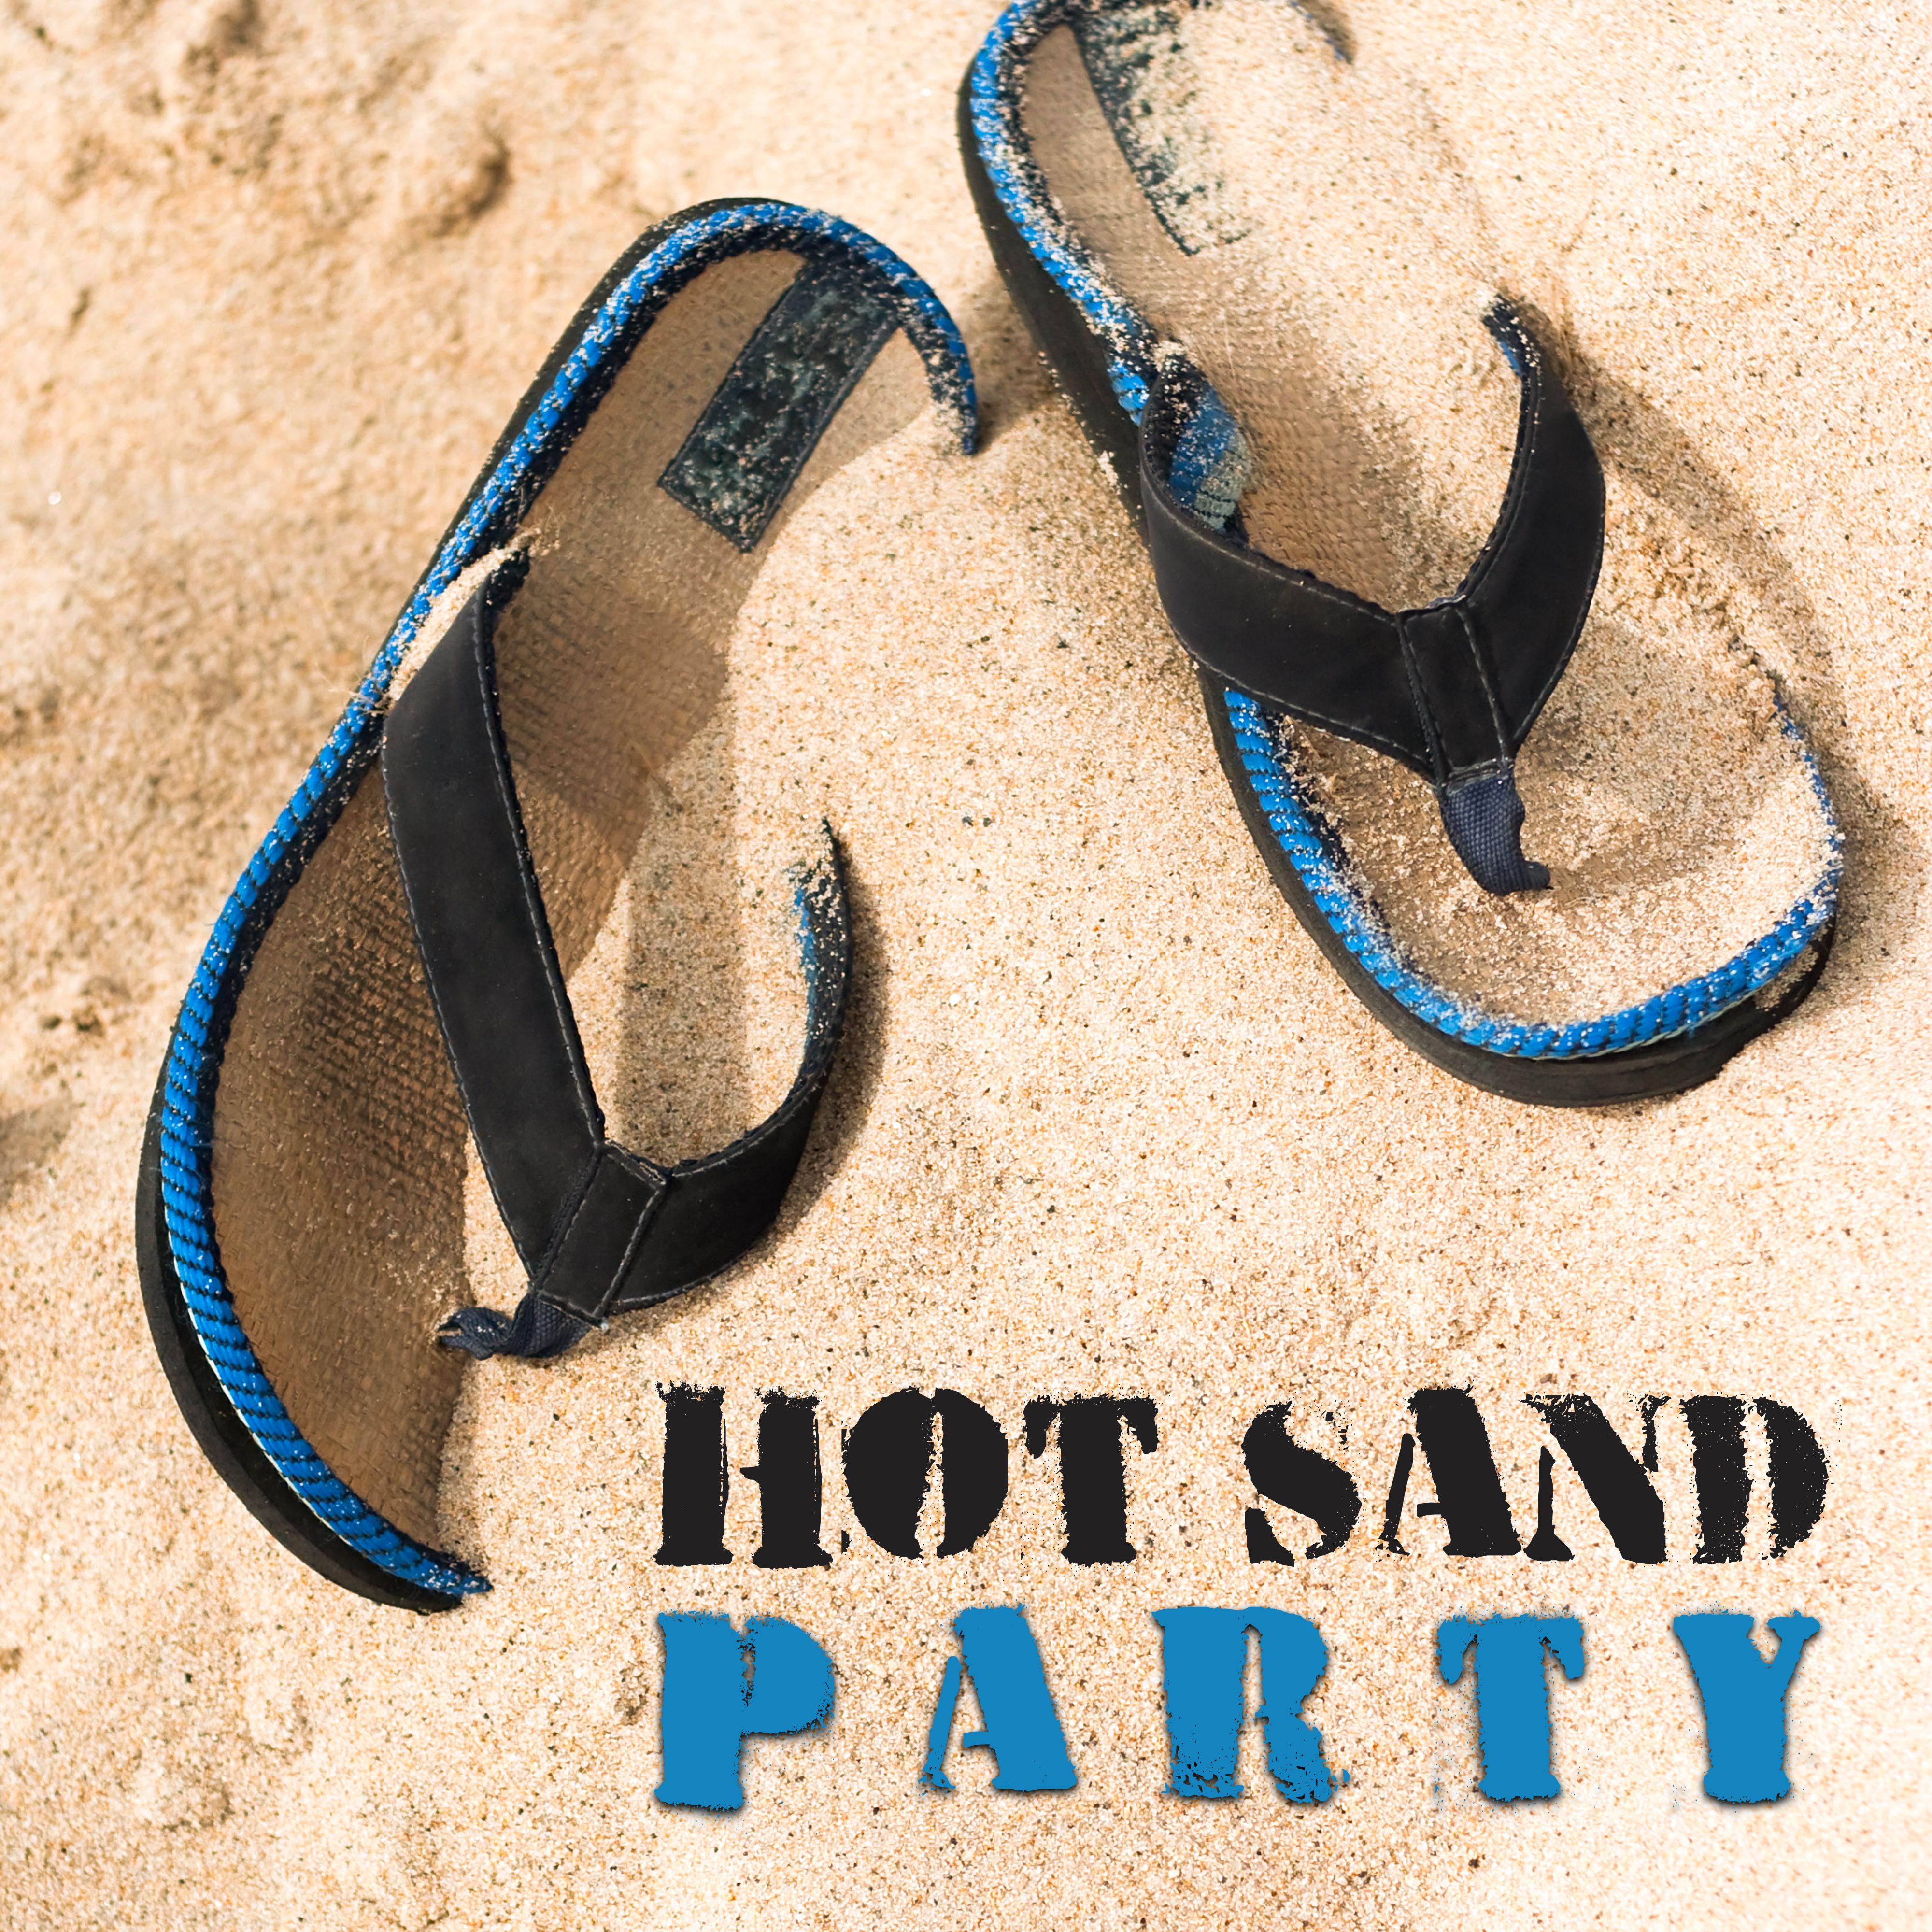 Hot Sand Party – Chillout, Hot Vibes, Party Hits, Summer Music, Chill Out 2017, Costa Del, Sol, Ibiza Club